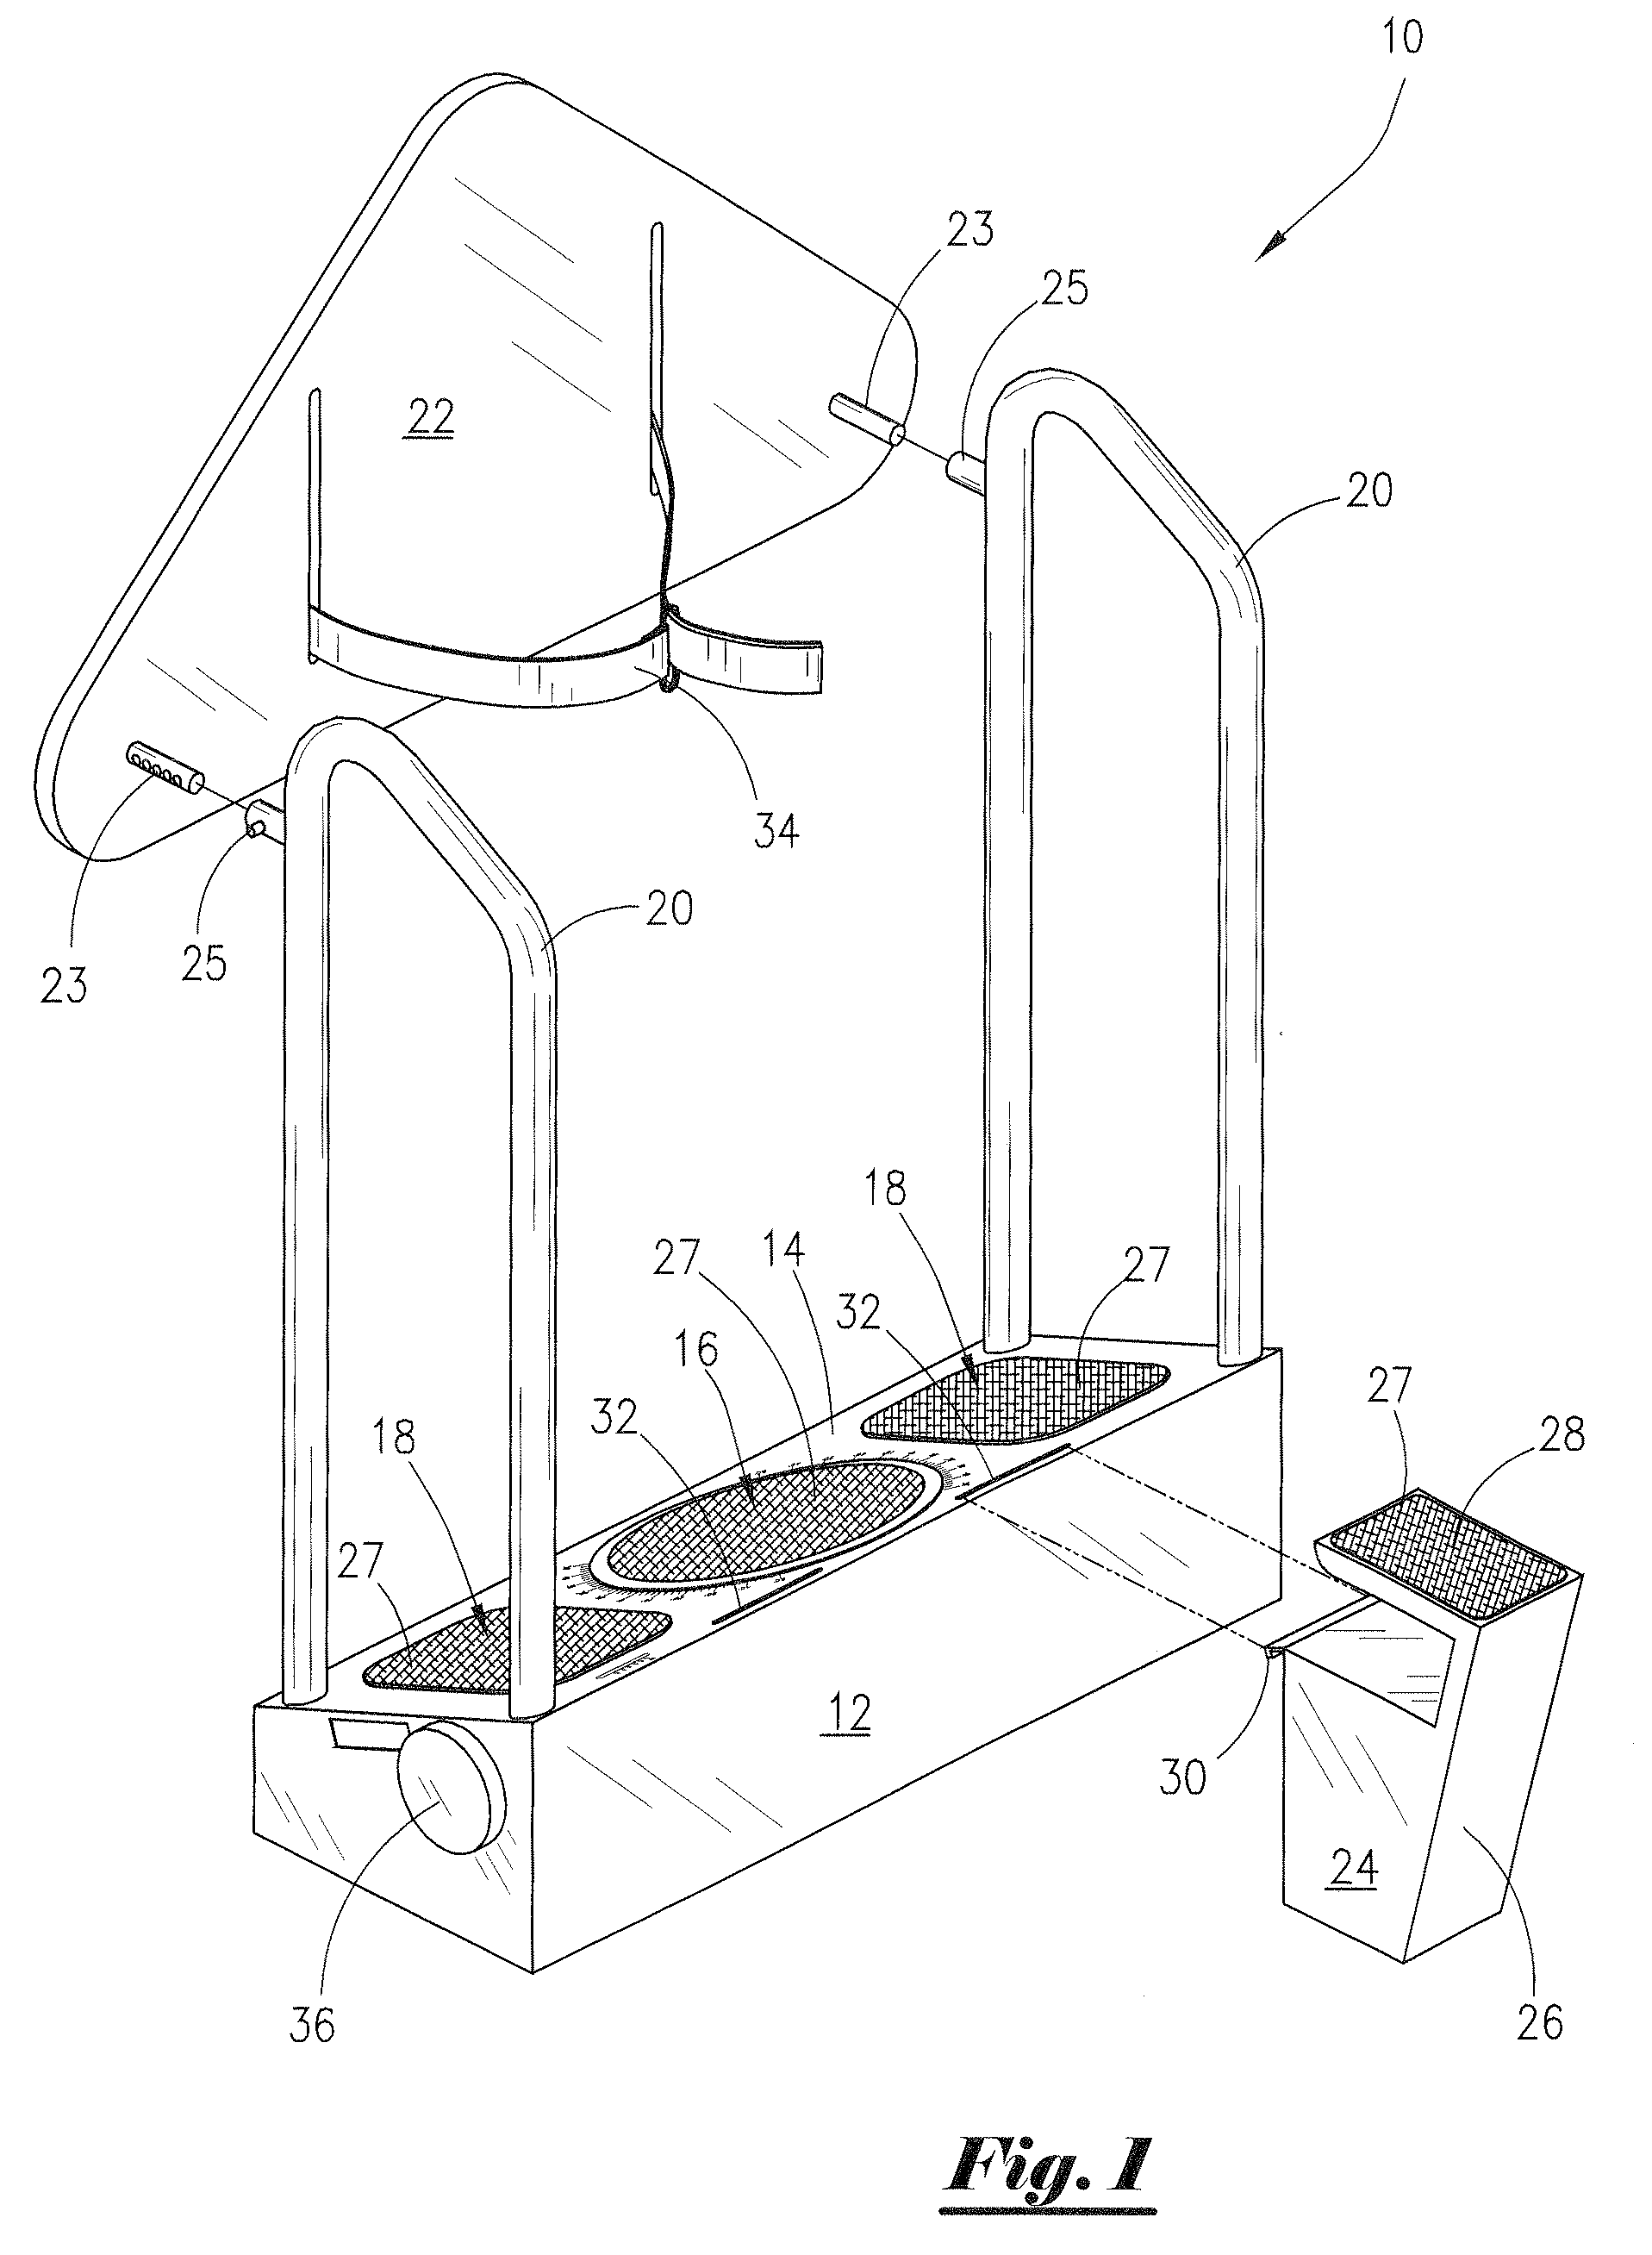 Exercise device and method